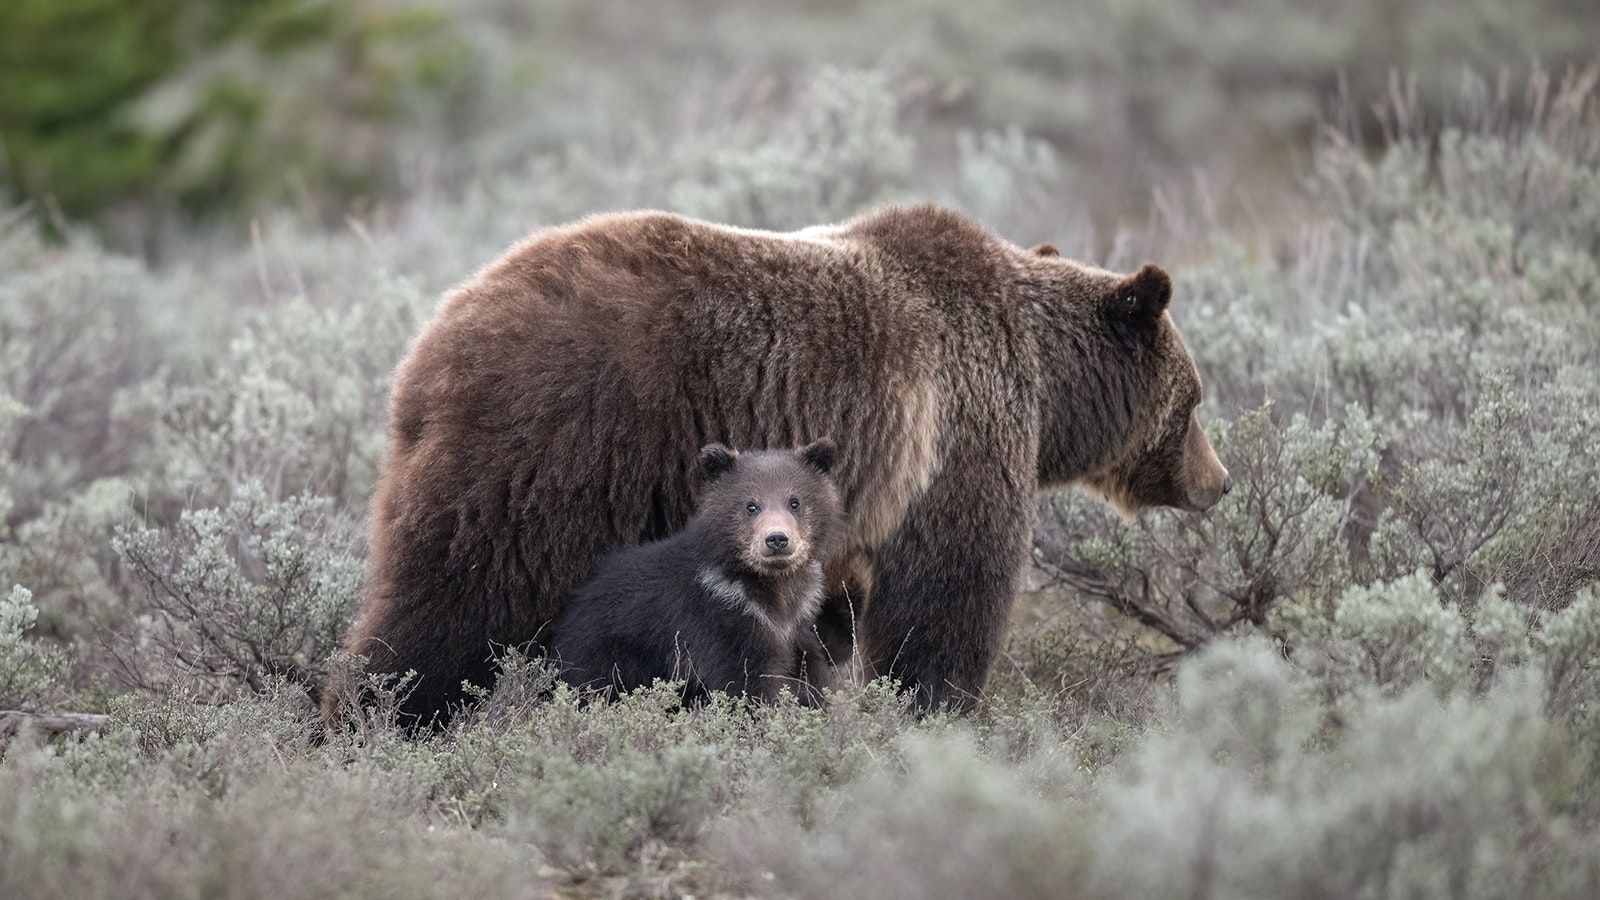 Grizzly 399’s not-yet-named cub looks back toward admirers. (Photo is owned by Savannah Rose and may not be reproduced)